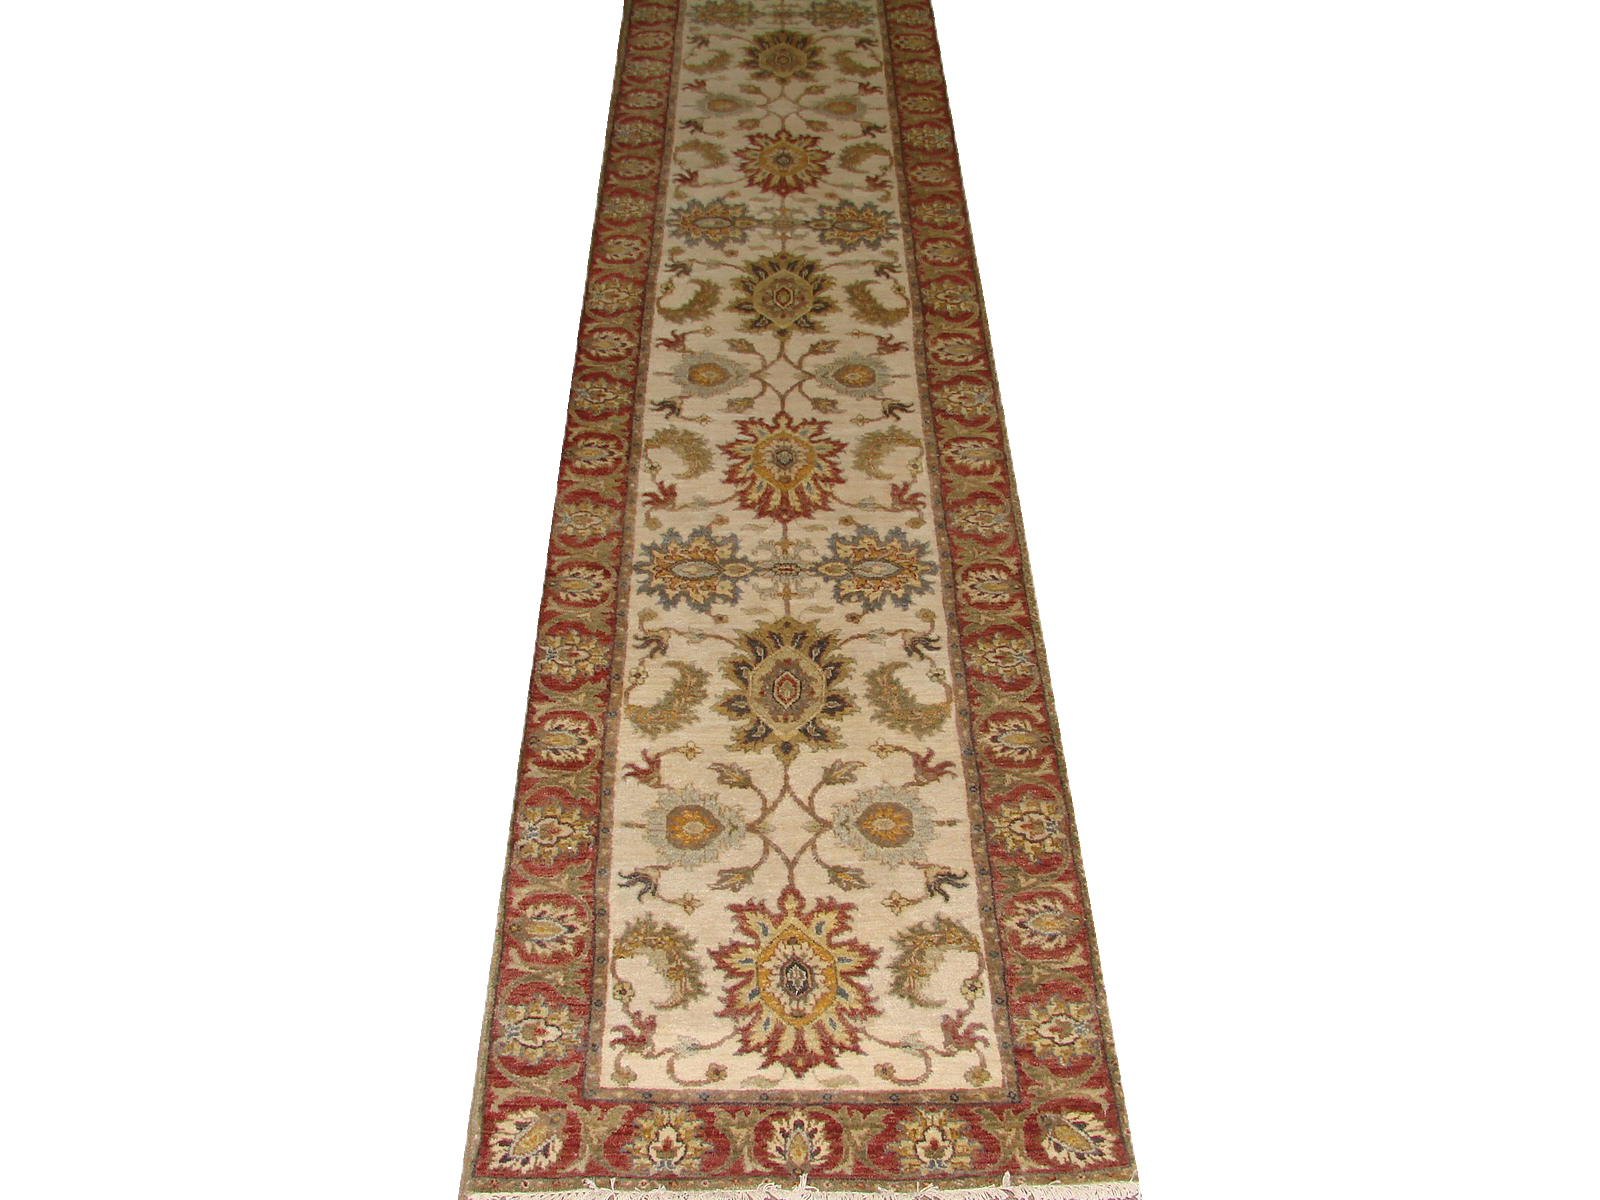 13 & Longer Runner Traditional Hand Knotted Wool Area Rug - MR20948